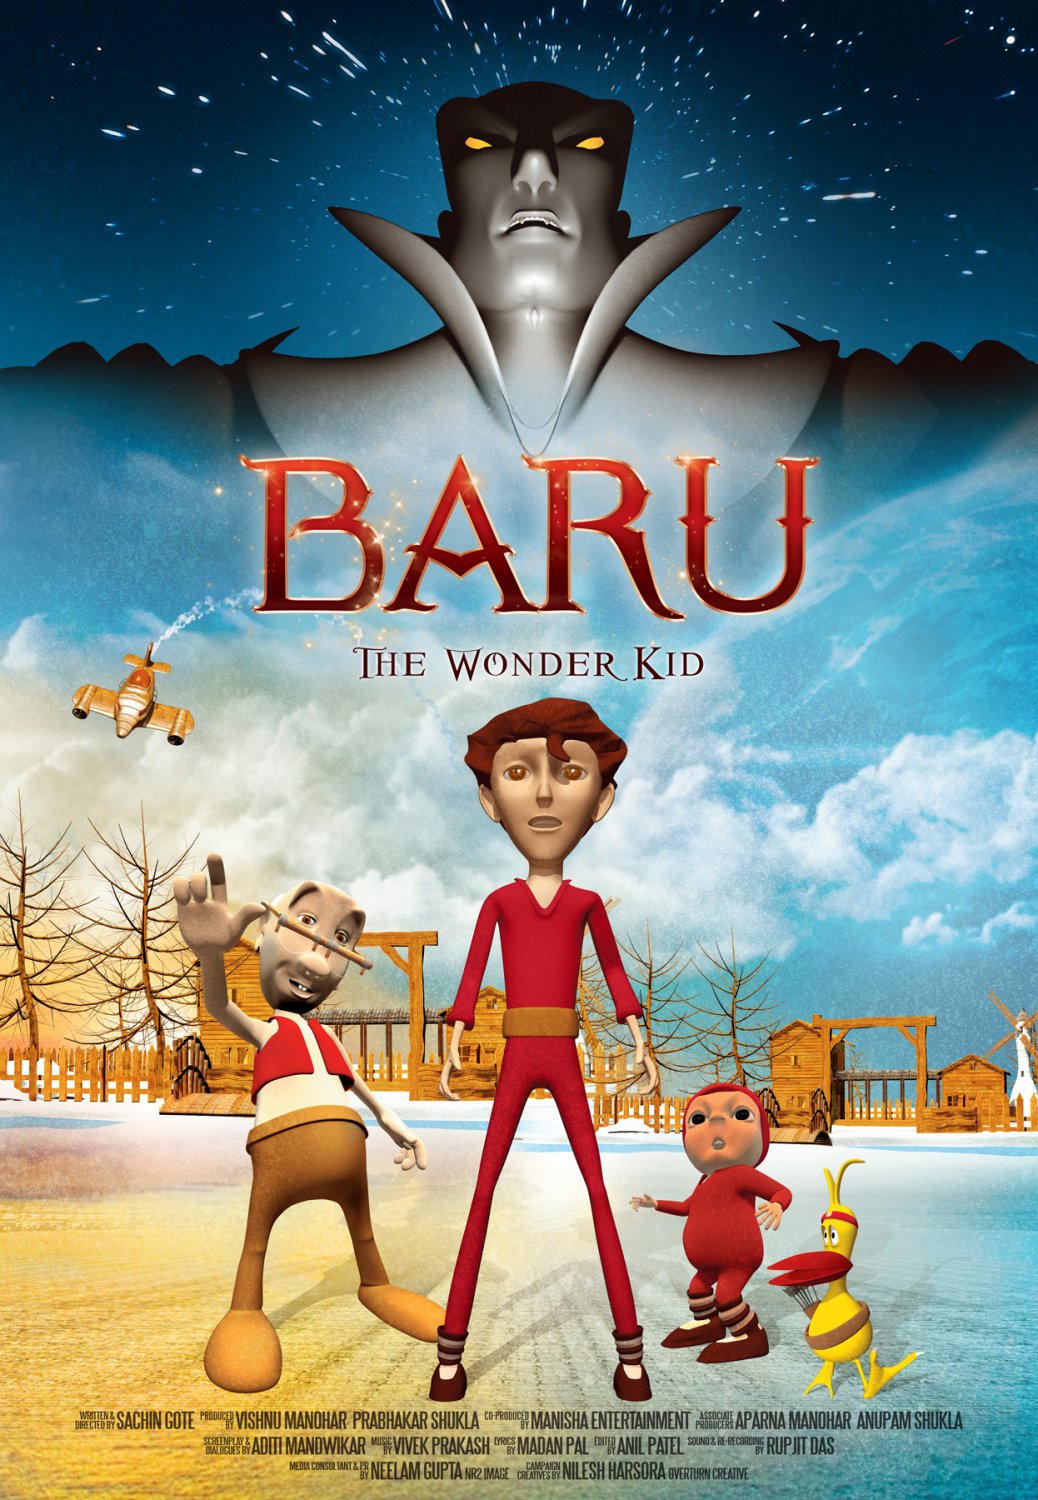 Extra Large Movie Poster Image for Baru - The Wonder Kid 